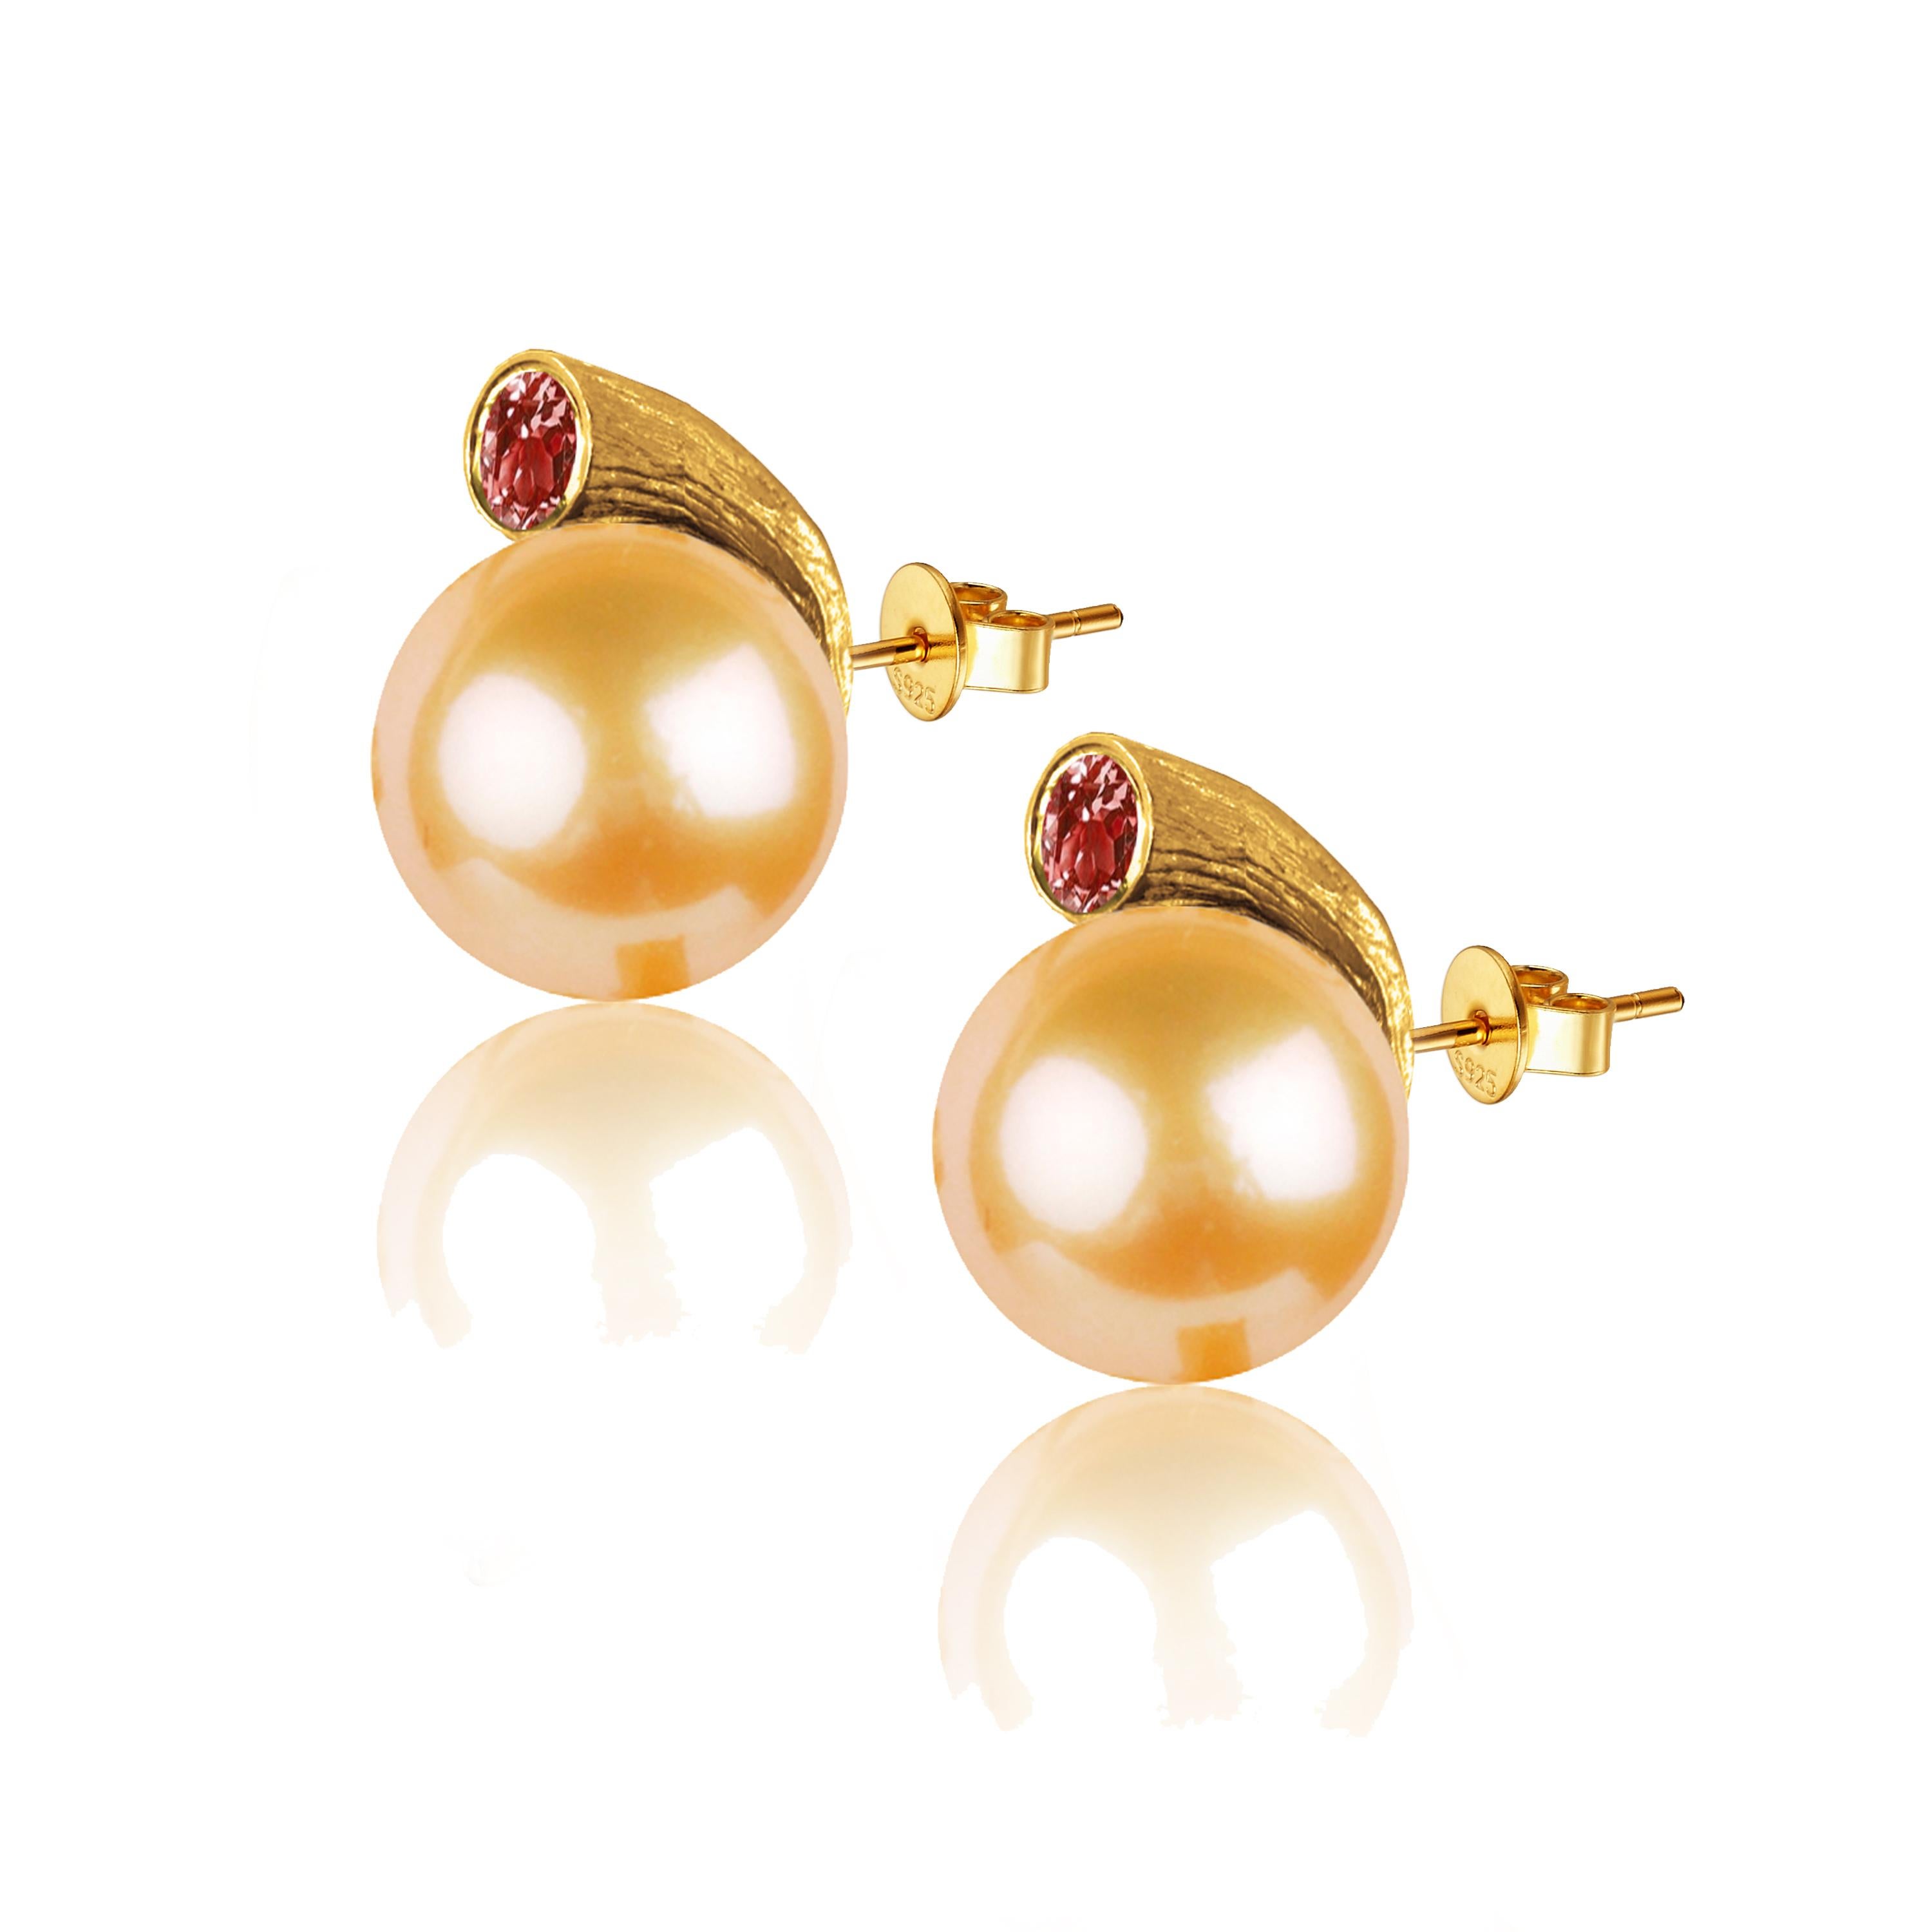 Fei Liu Fine Jewellery's 18ct yellow gold earrings- a modern twist to pearl earrings. With the inspiration from coral forming the sculptural essence with an edgy and dramatic look. Featuring 9mm mandarin pearl with 0.04ct red garnet on the textured